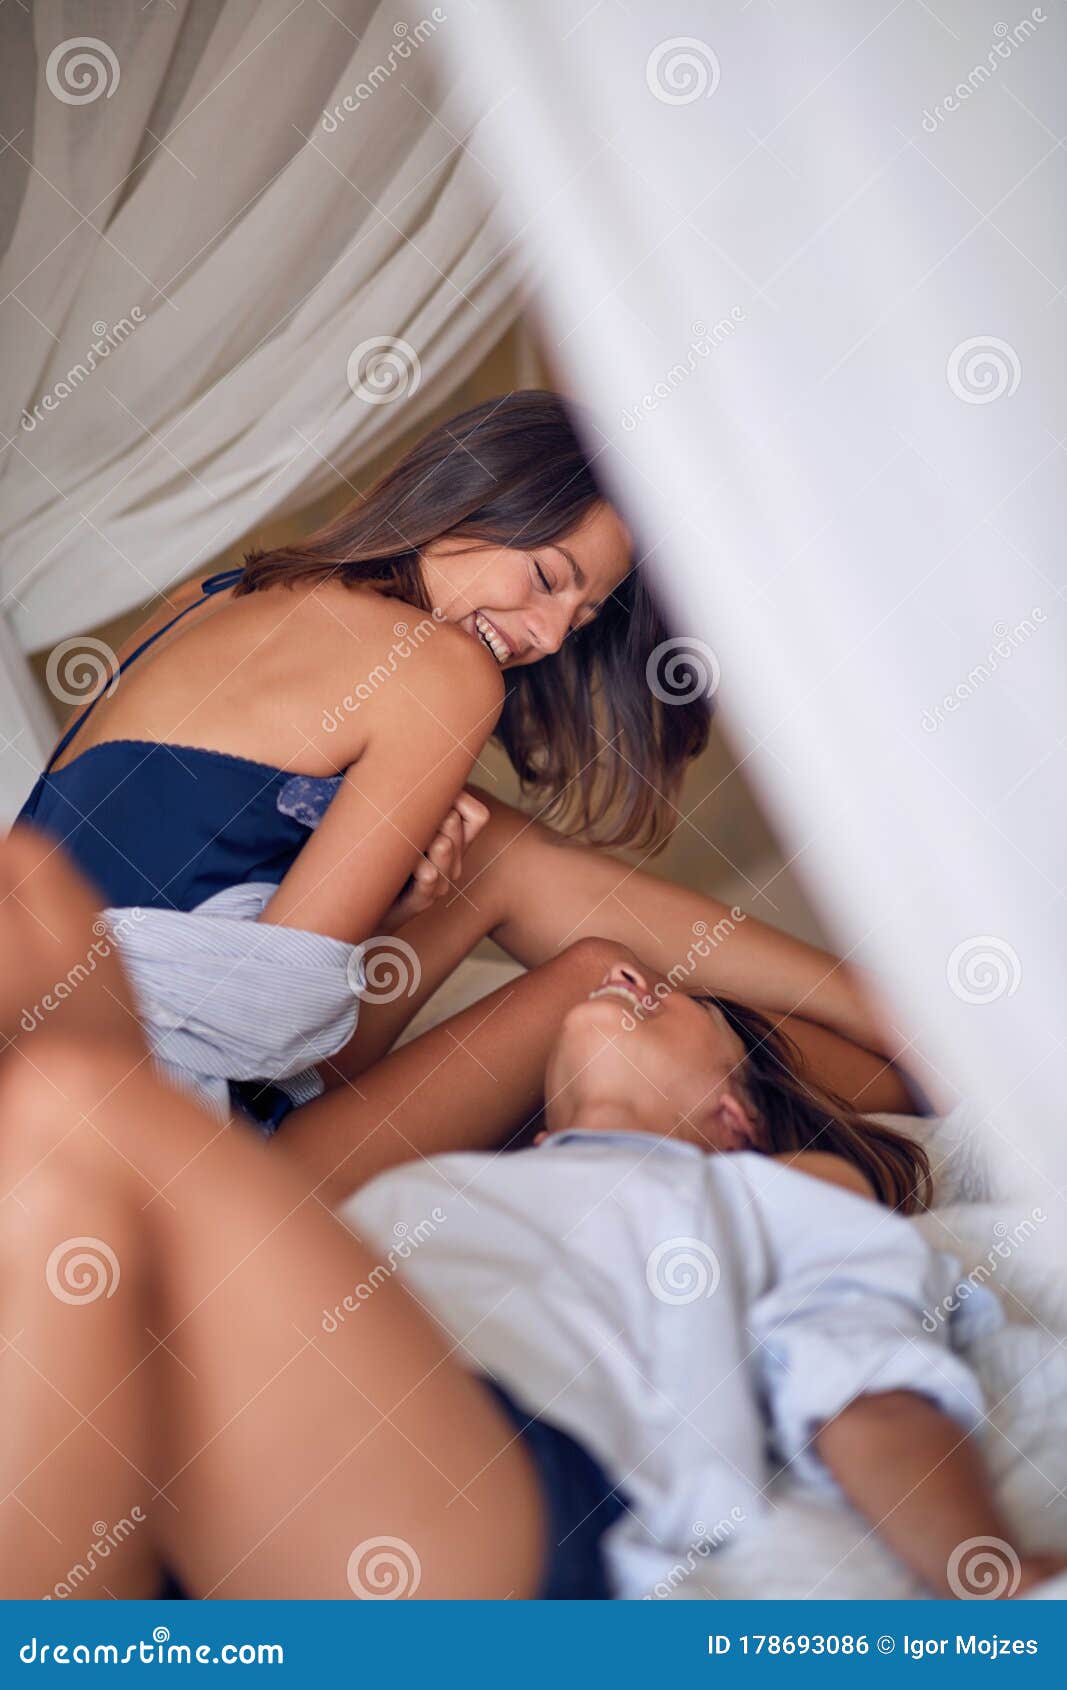 A Young Lesbian Couple very Very Sexy. C & D